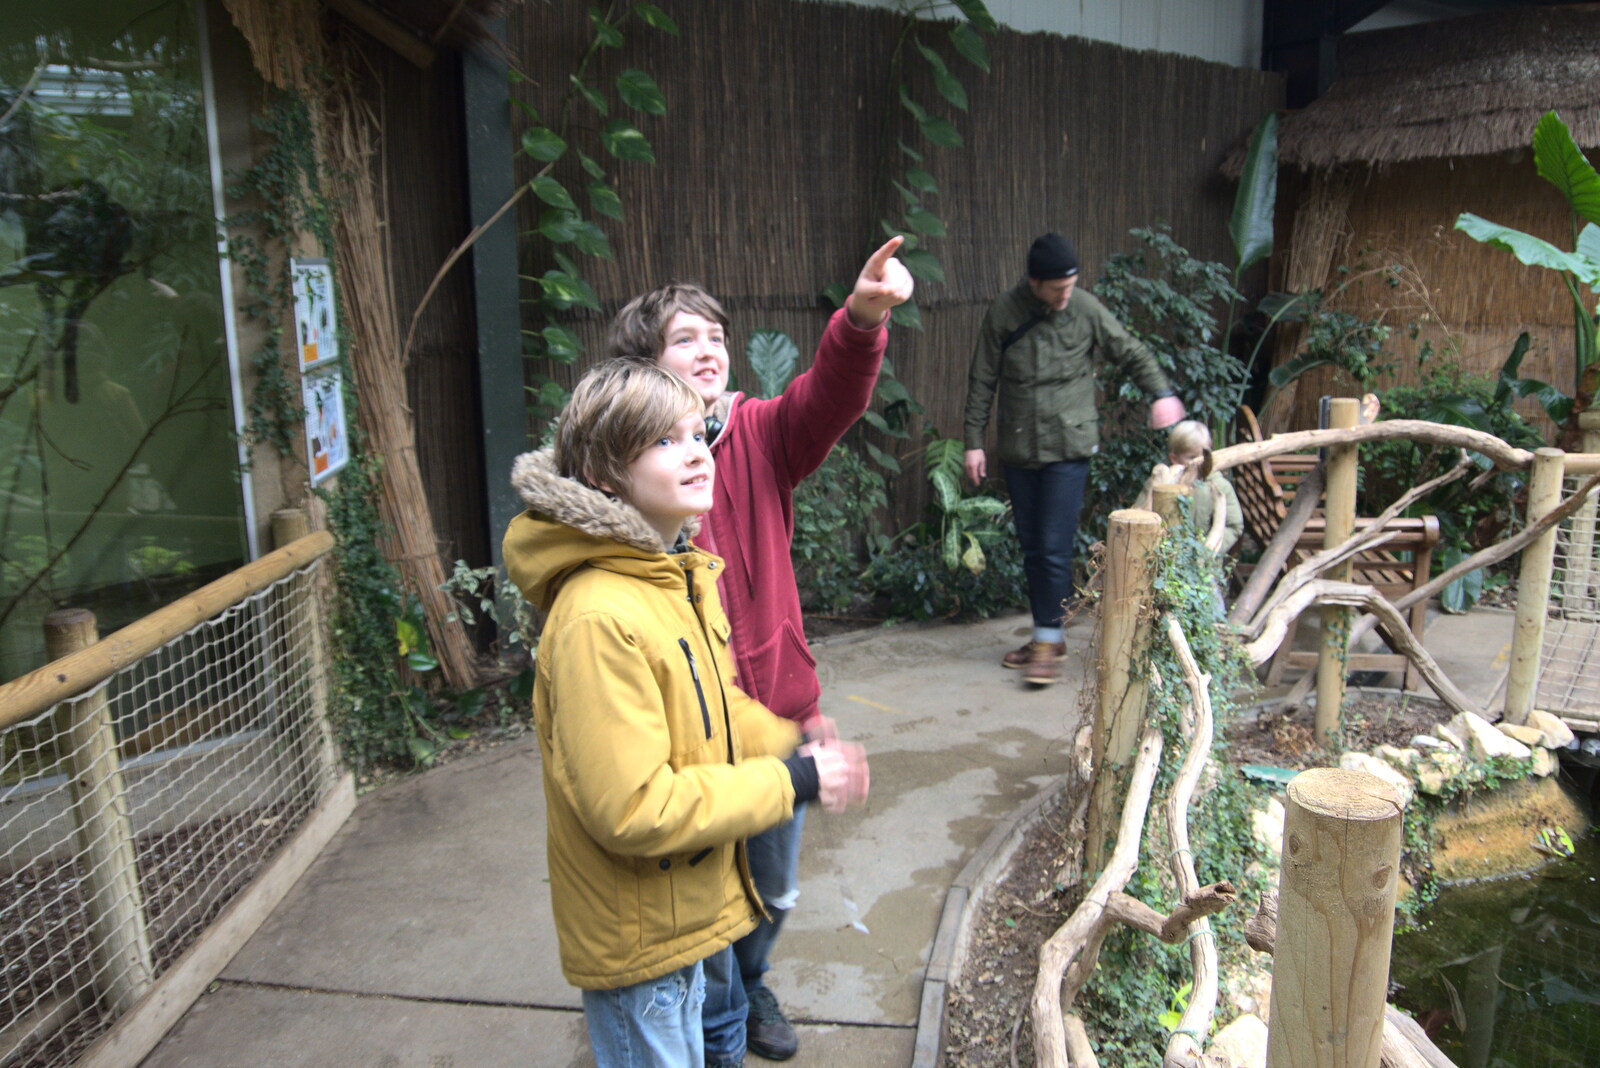 A Few Hours at the Zoo, Banham, Norfolk - 8th January 2023: Fred points at some sloth action